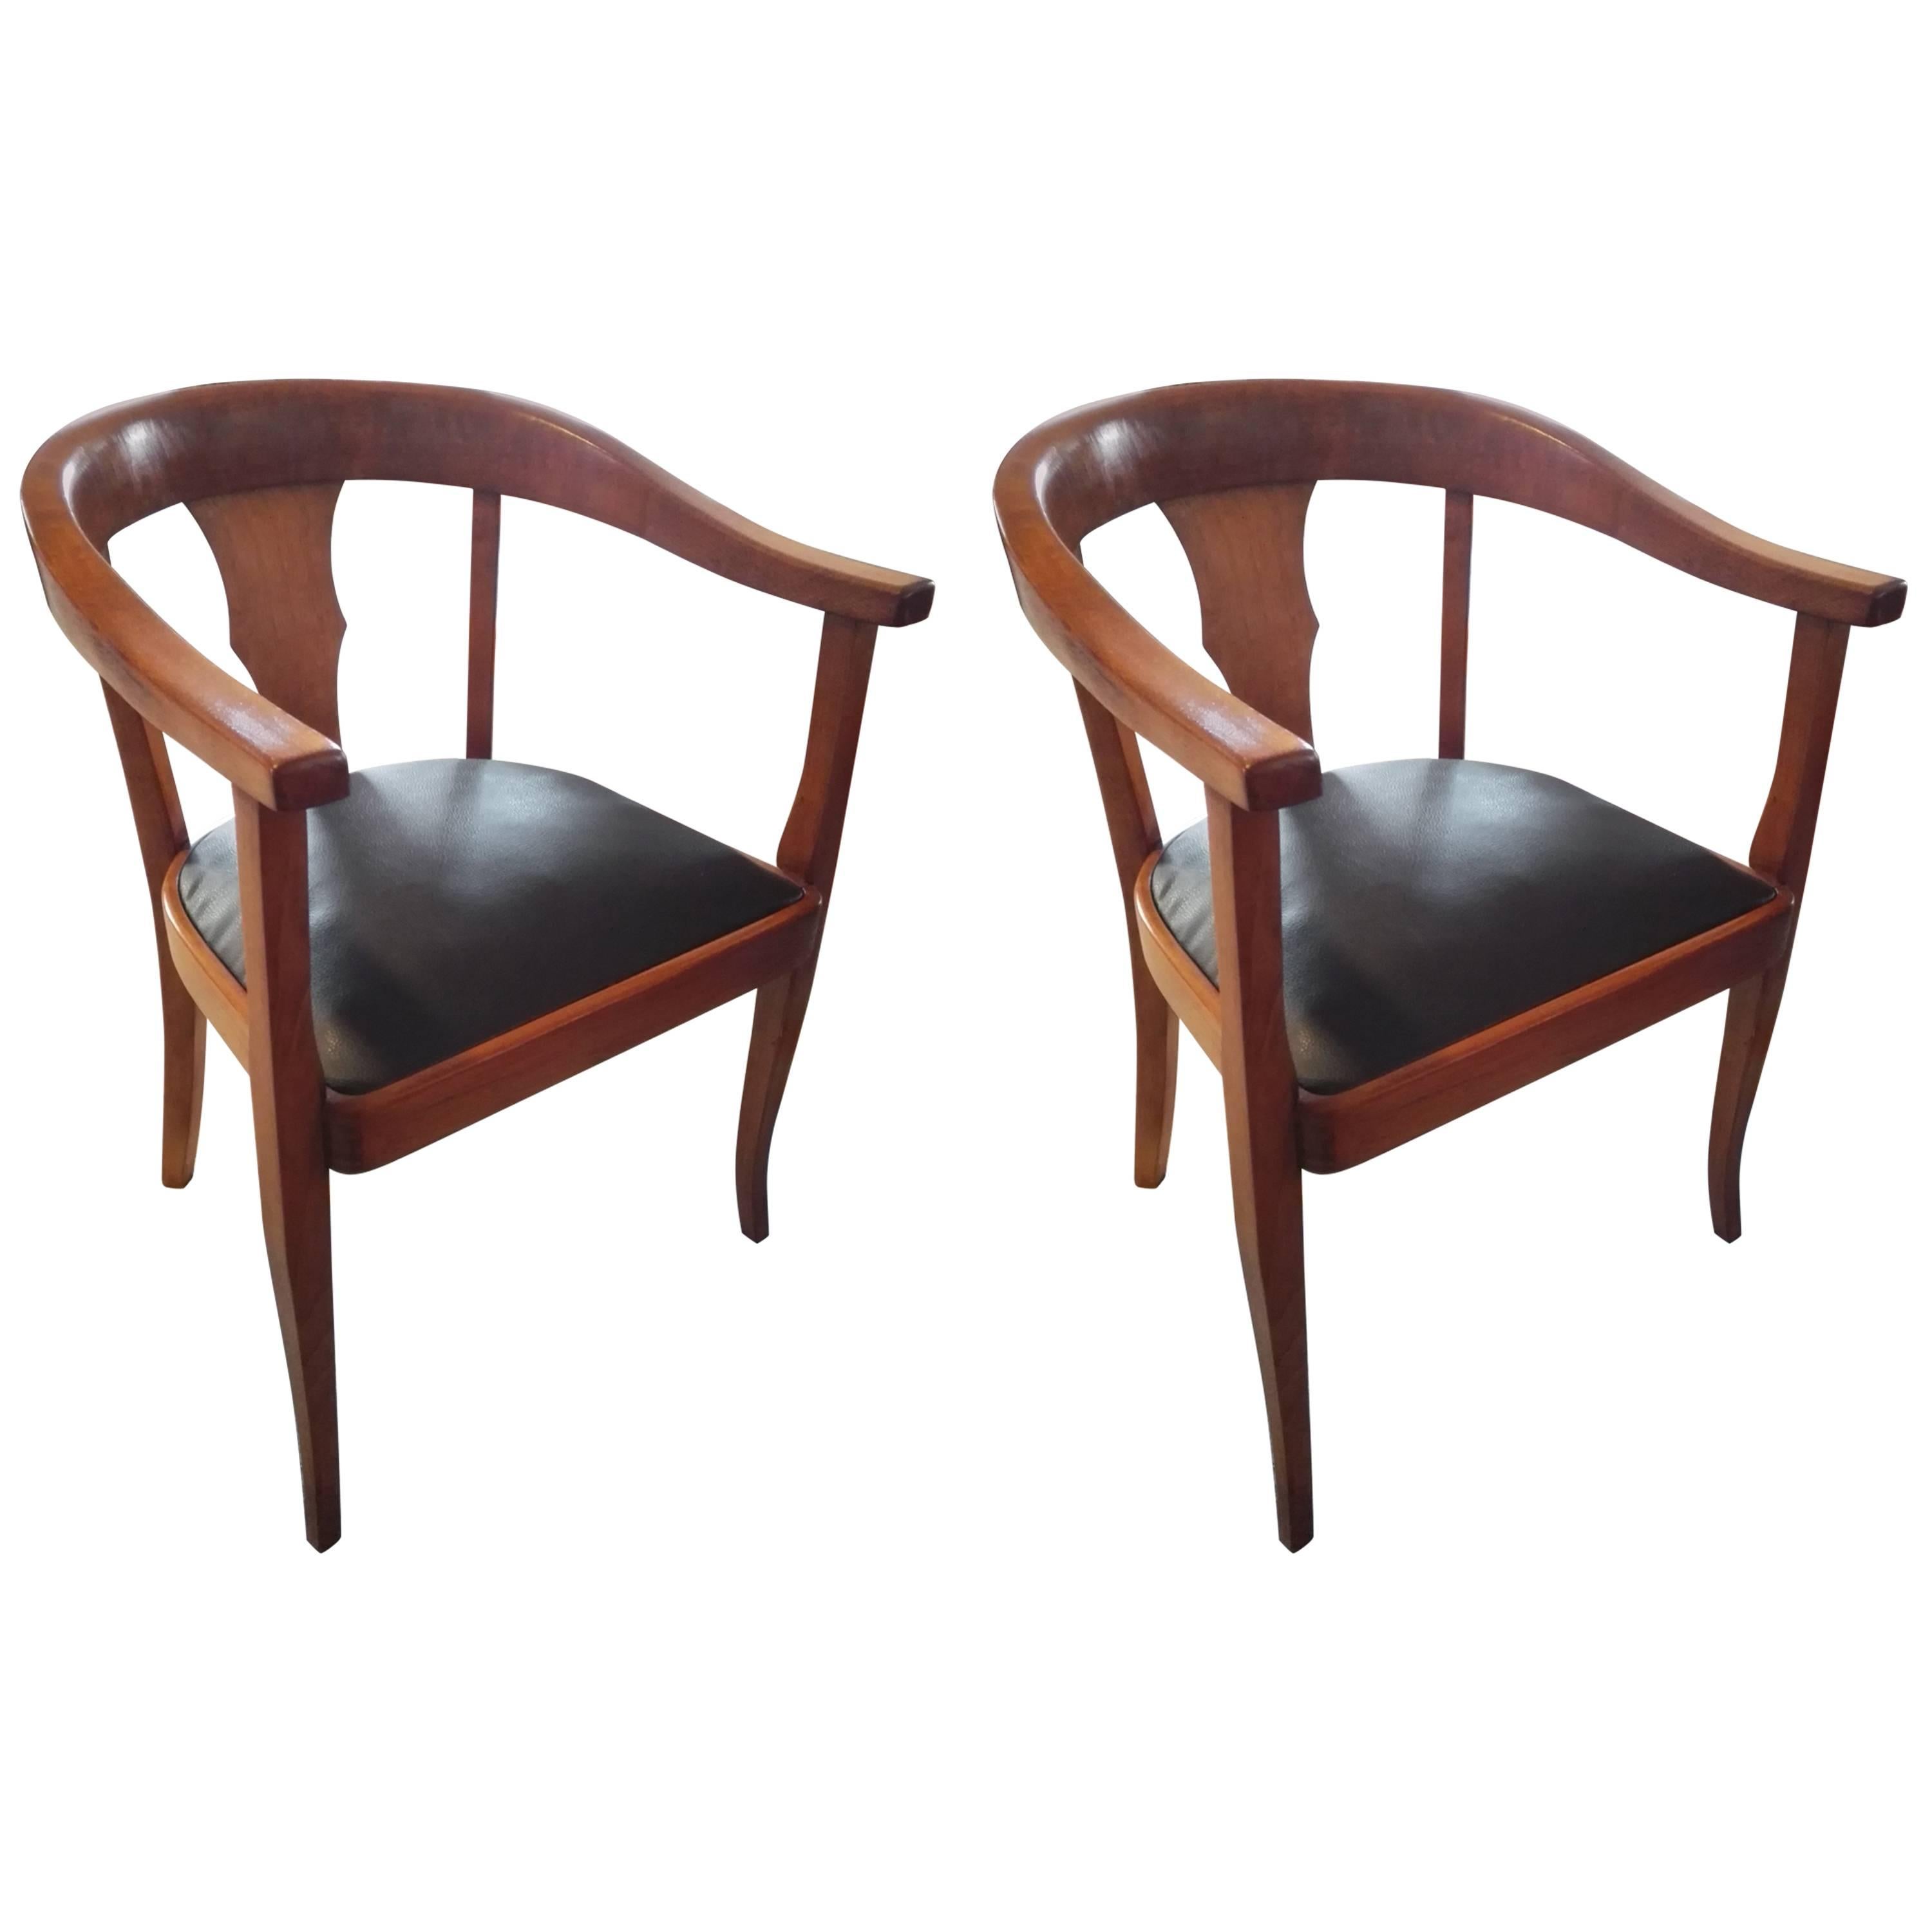 Pair of Bauhaus Armchairs Germany 1925 Bentwood Massive Classic Modern Design For Sale